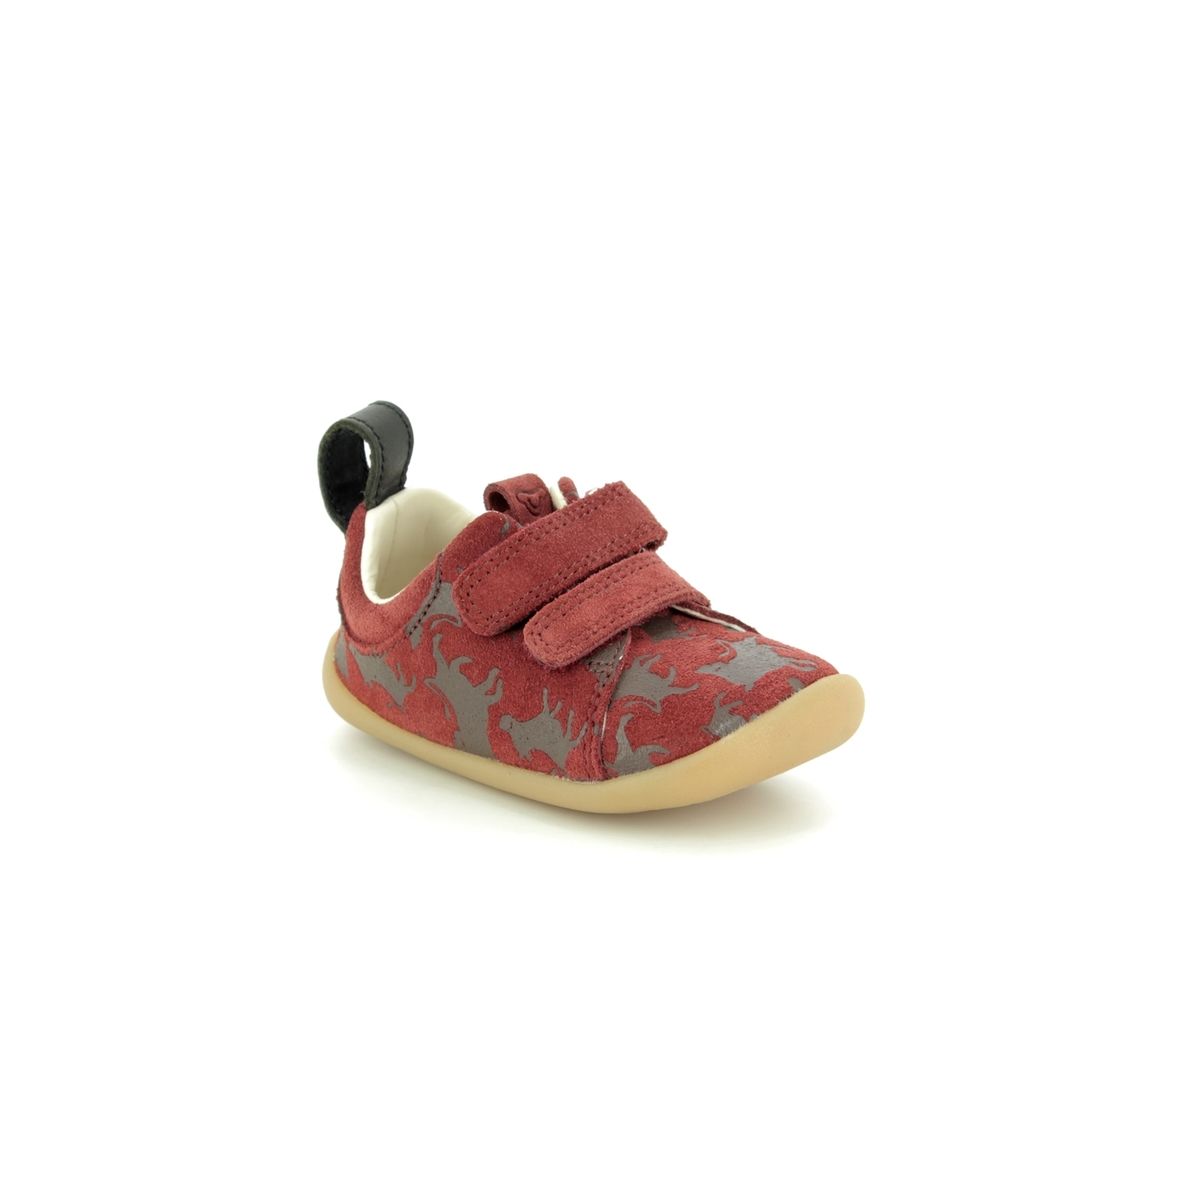 clarks baby winter shoes